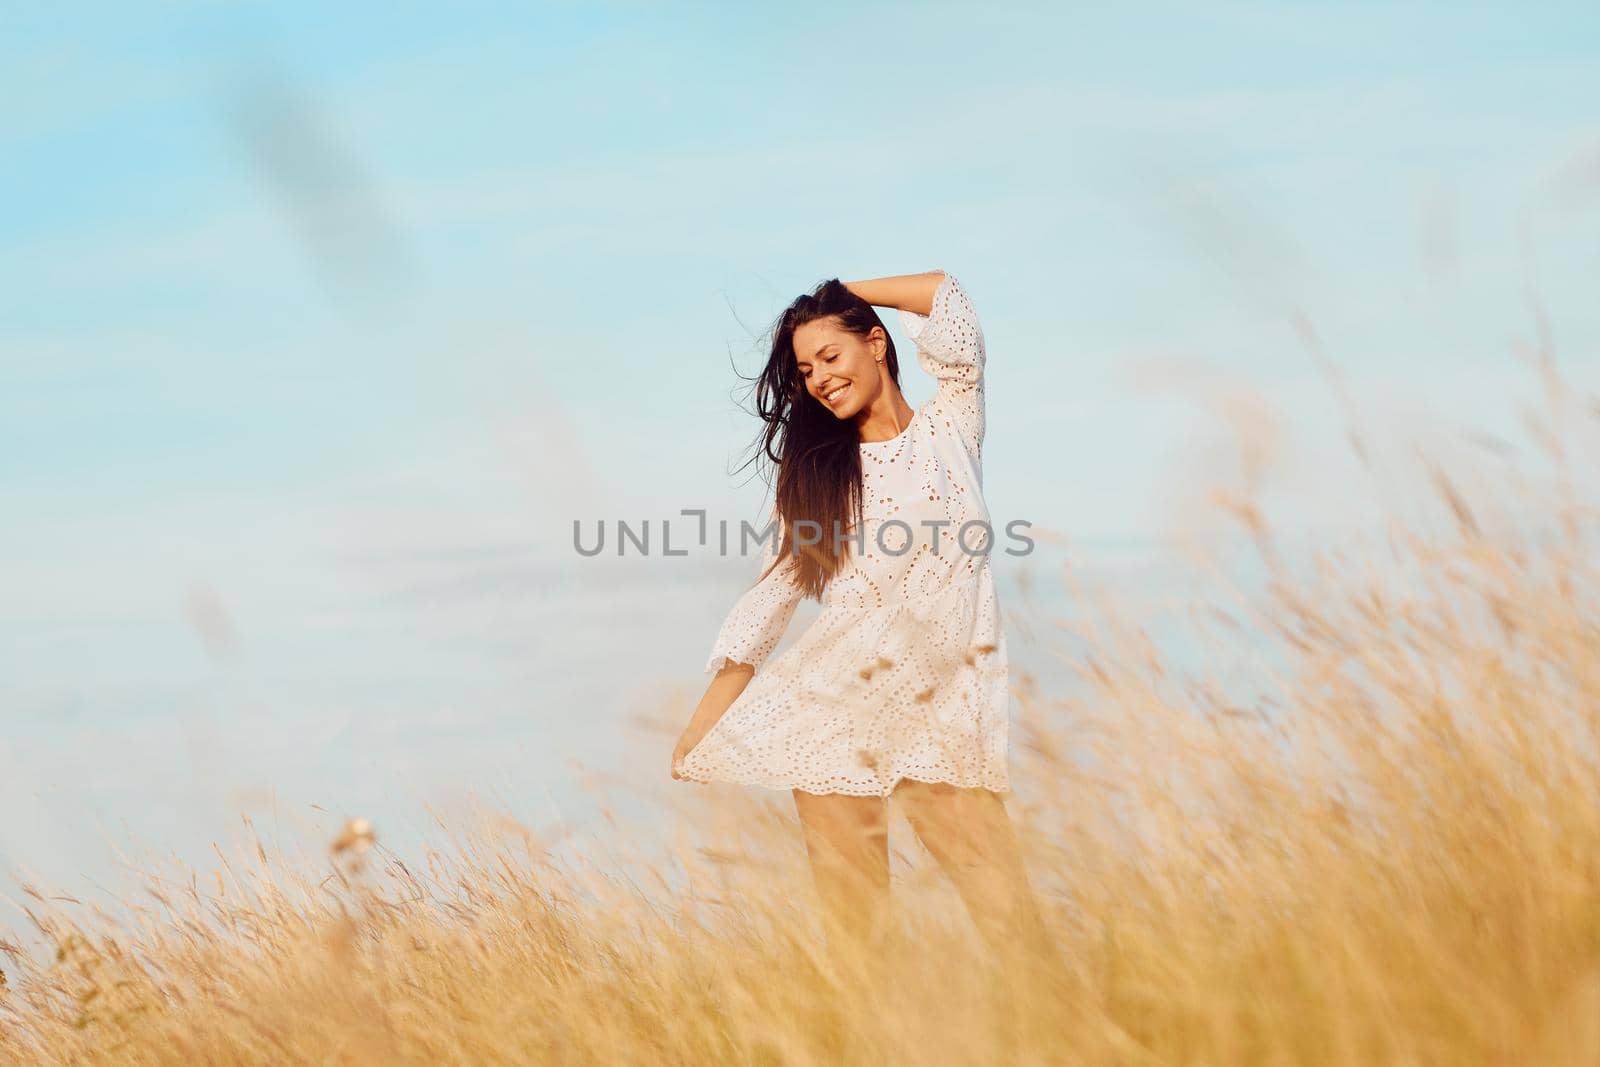 Portrait of a young beautiful girl posing outdoors in the field